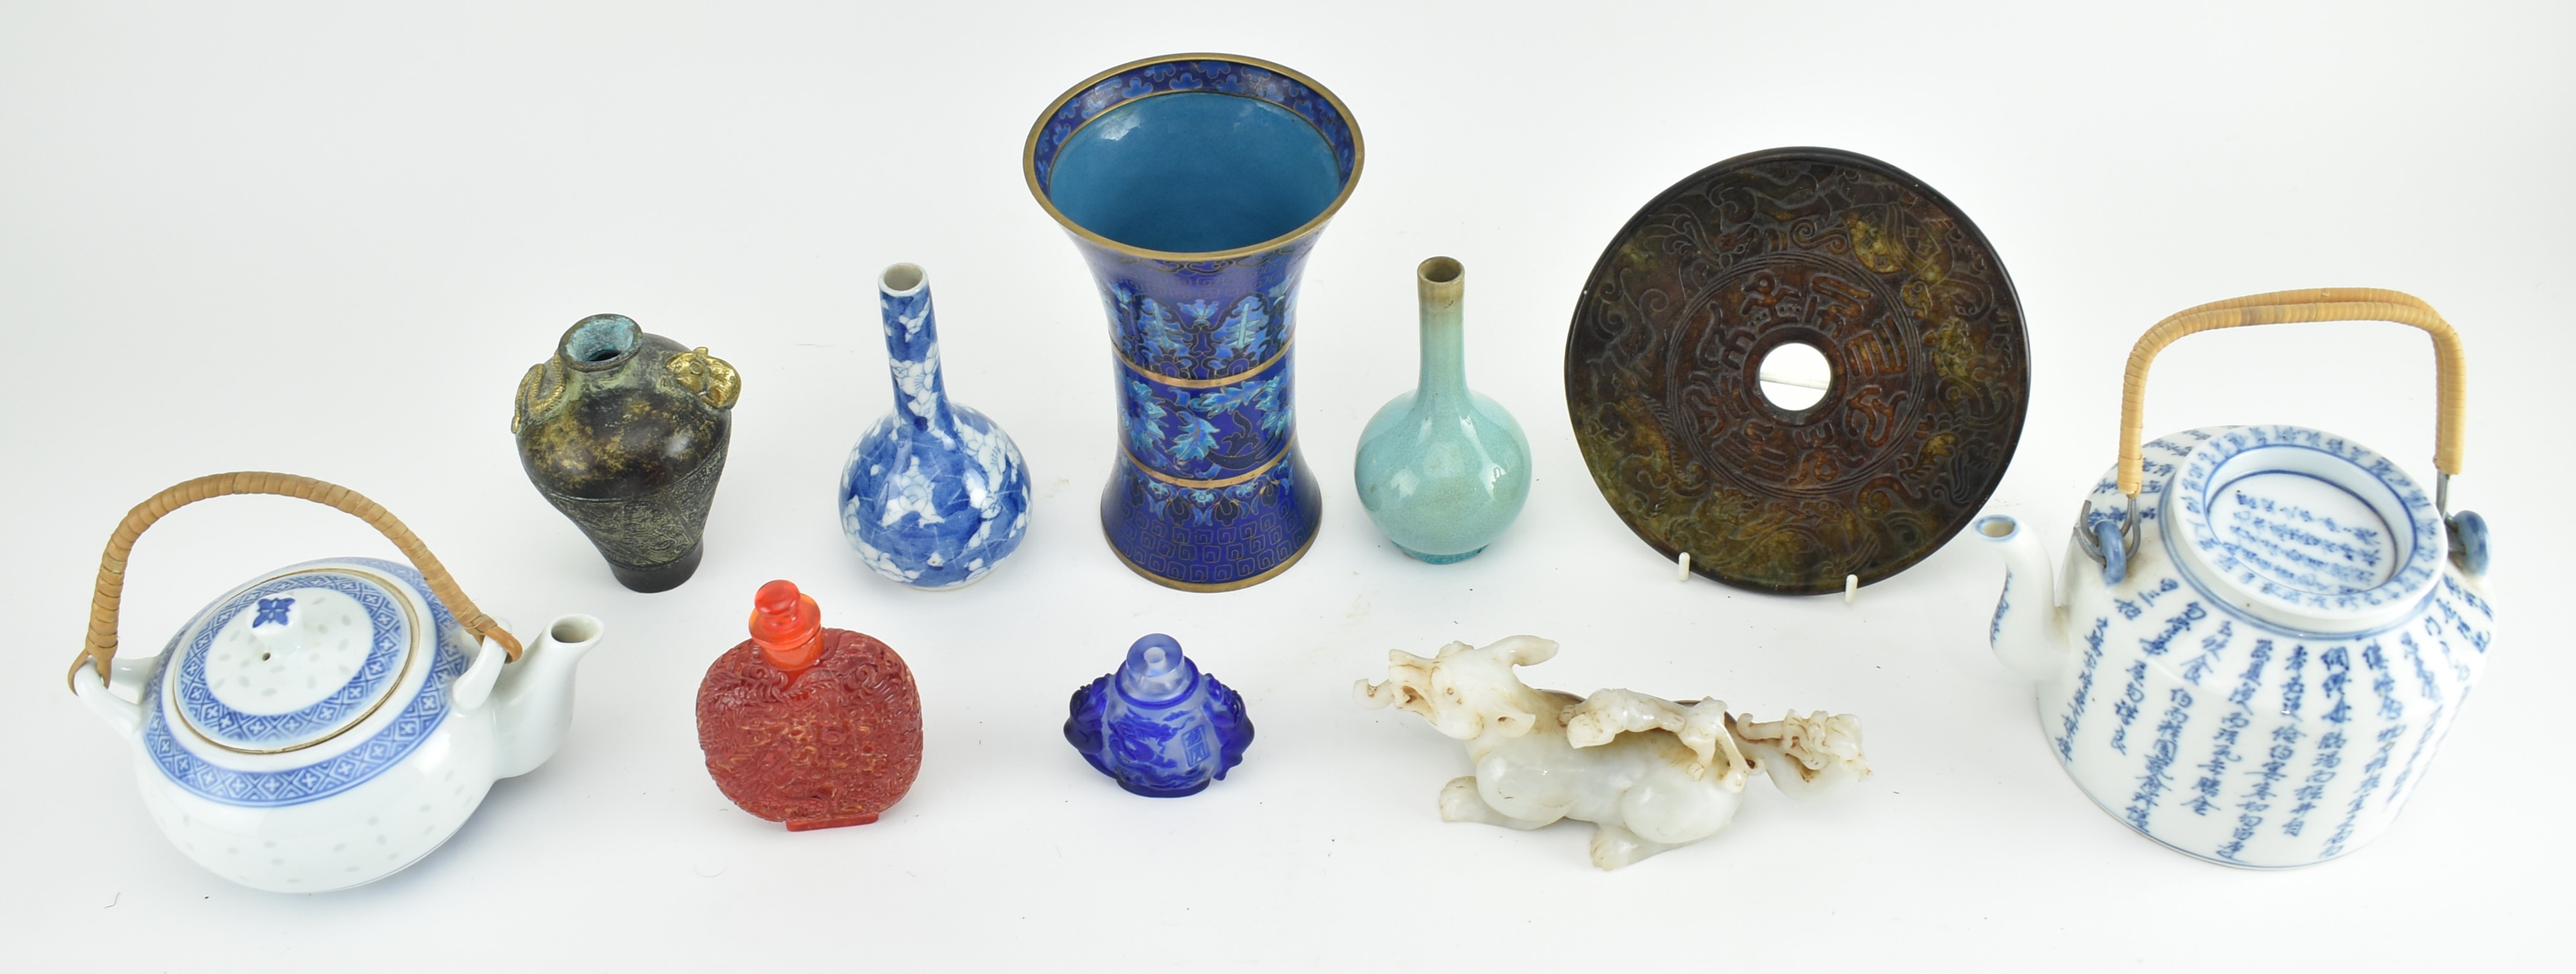 COLLECTION OF TEN 19/20TH CENTURY CHINESE AND JAPANESE ITEMS - Image 3 of 18